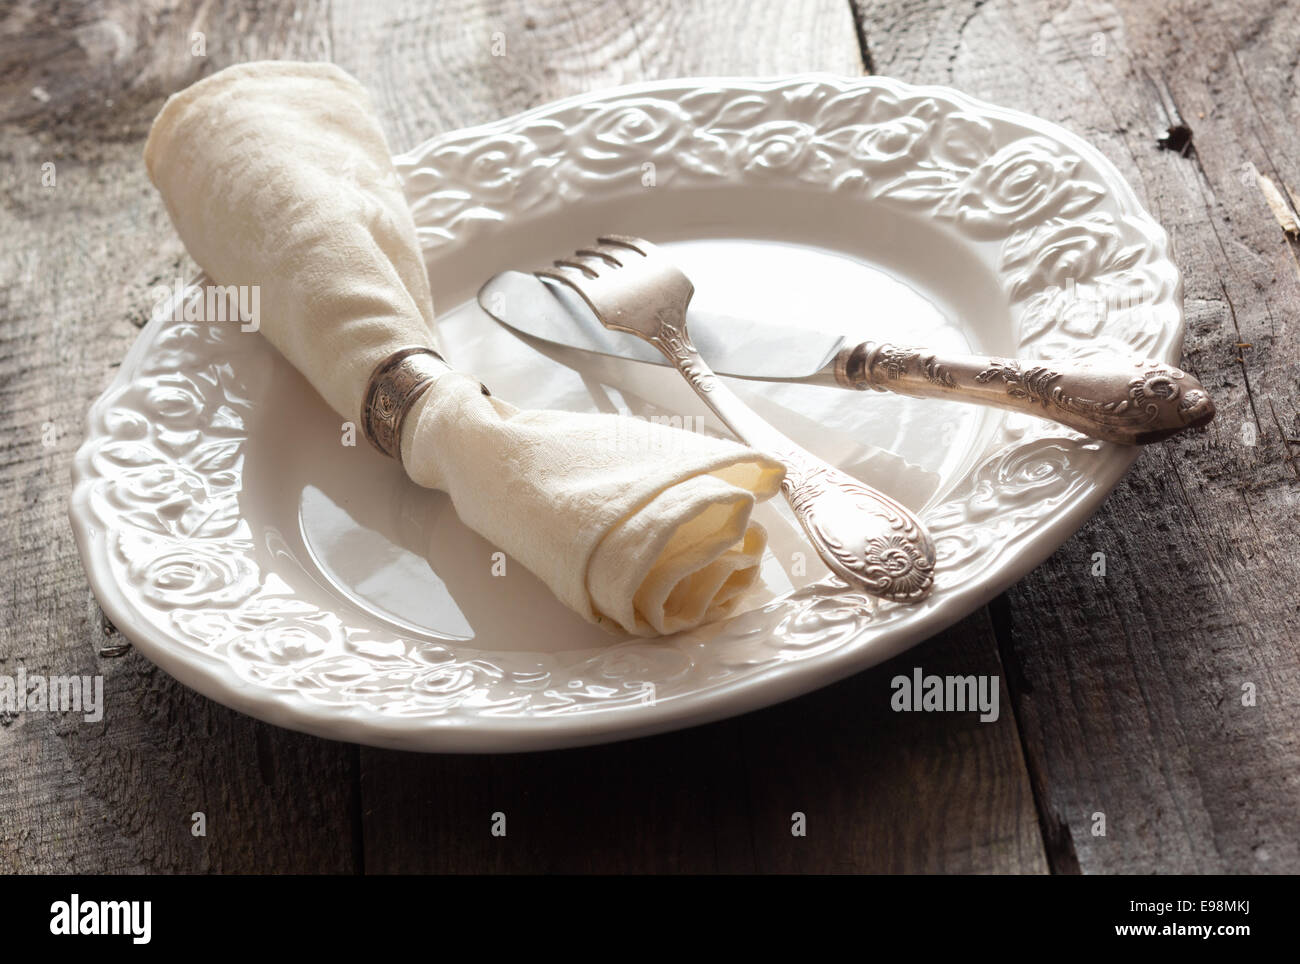 White rose patterned dinner plate with silverware and a napkin in an informal table setting Stock Photo